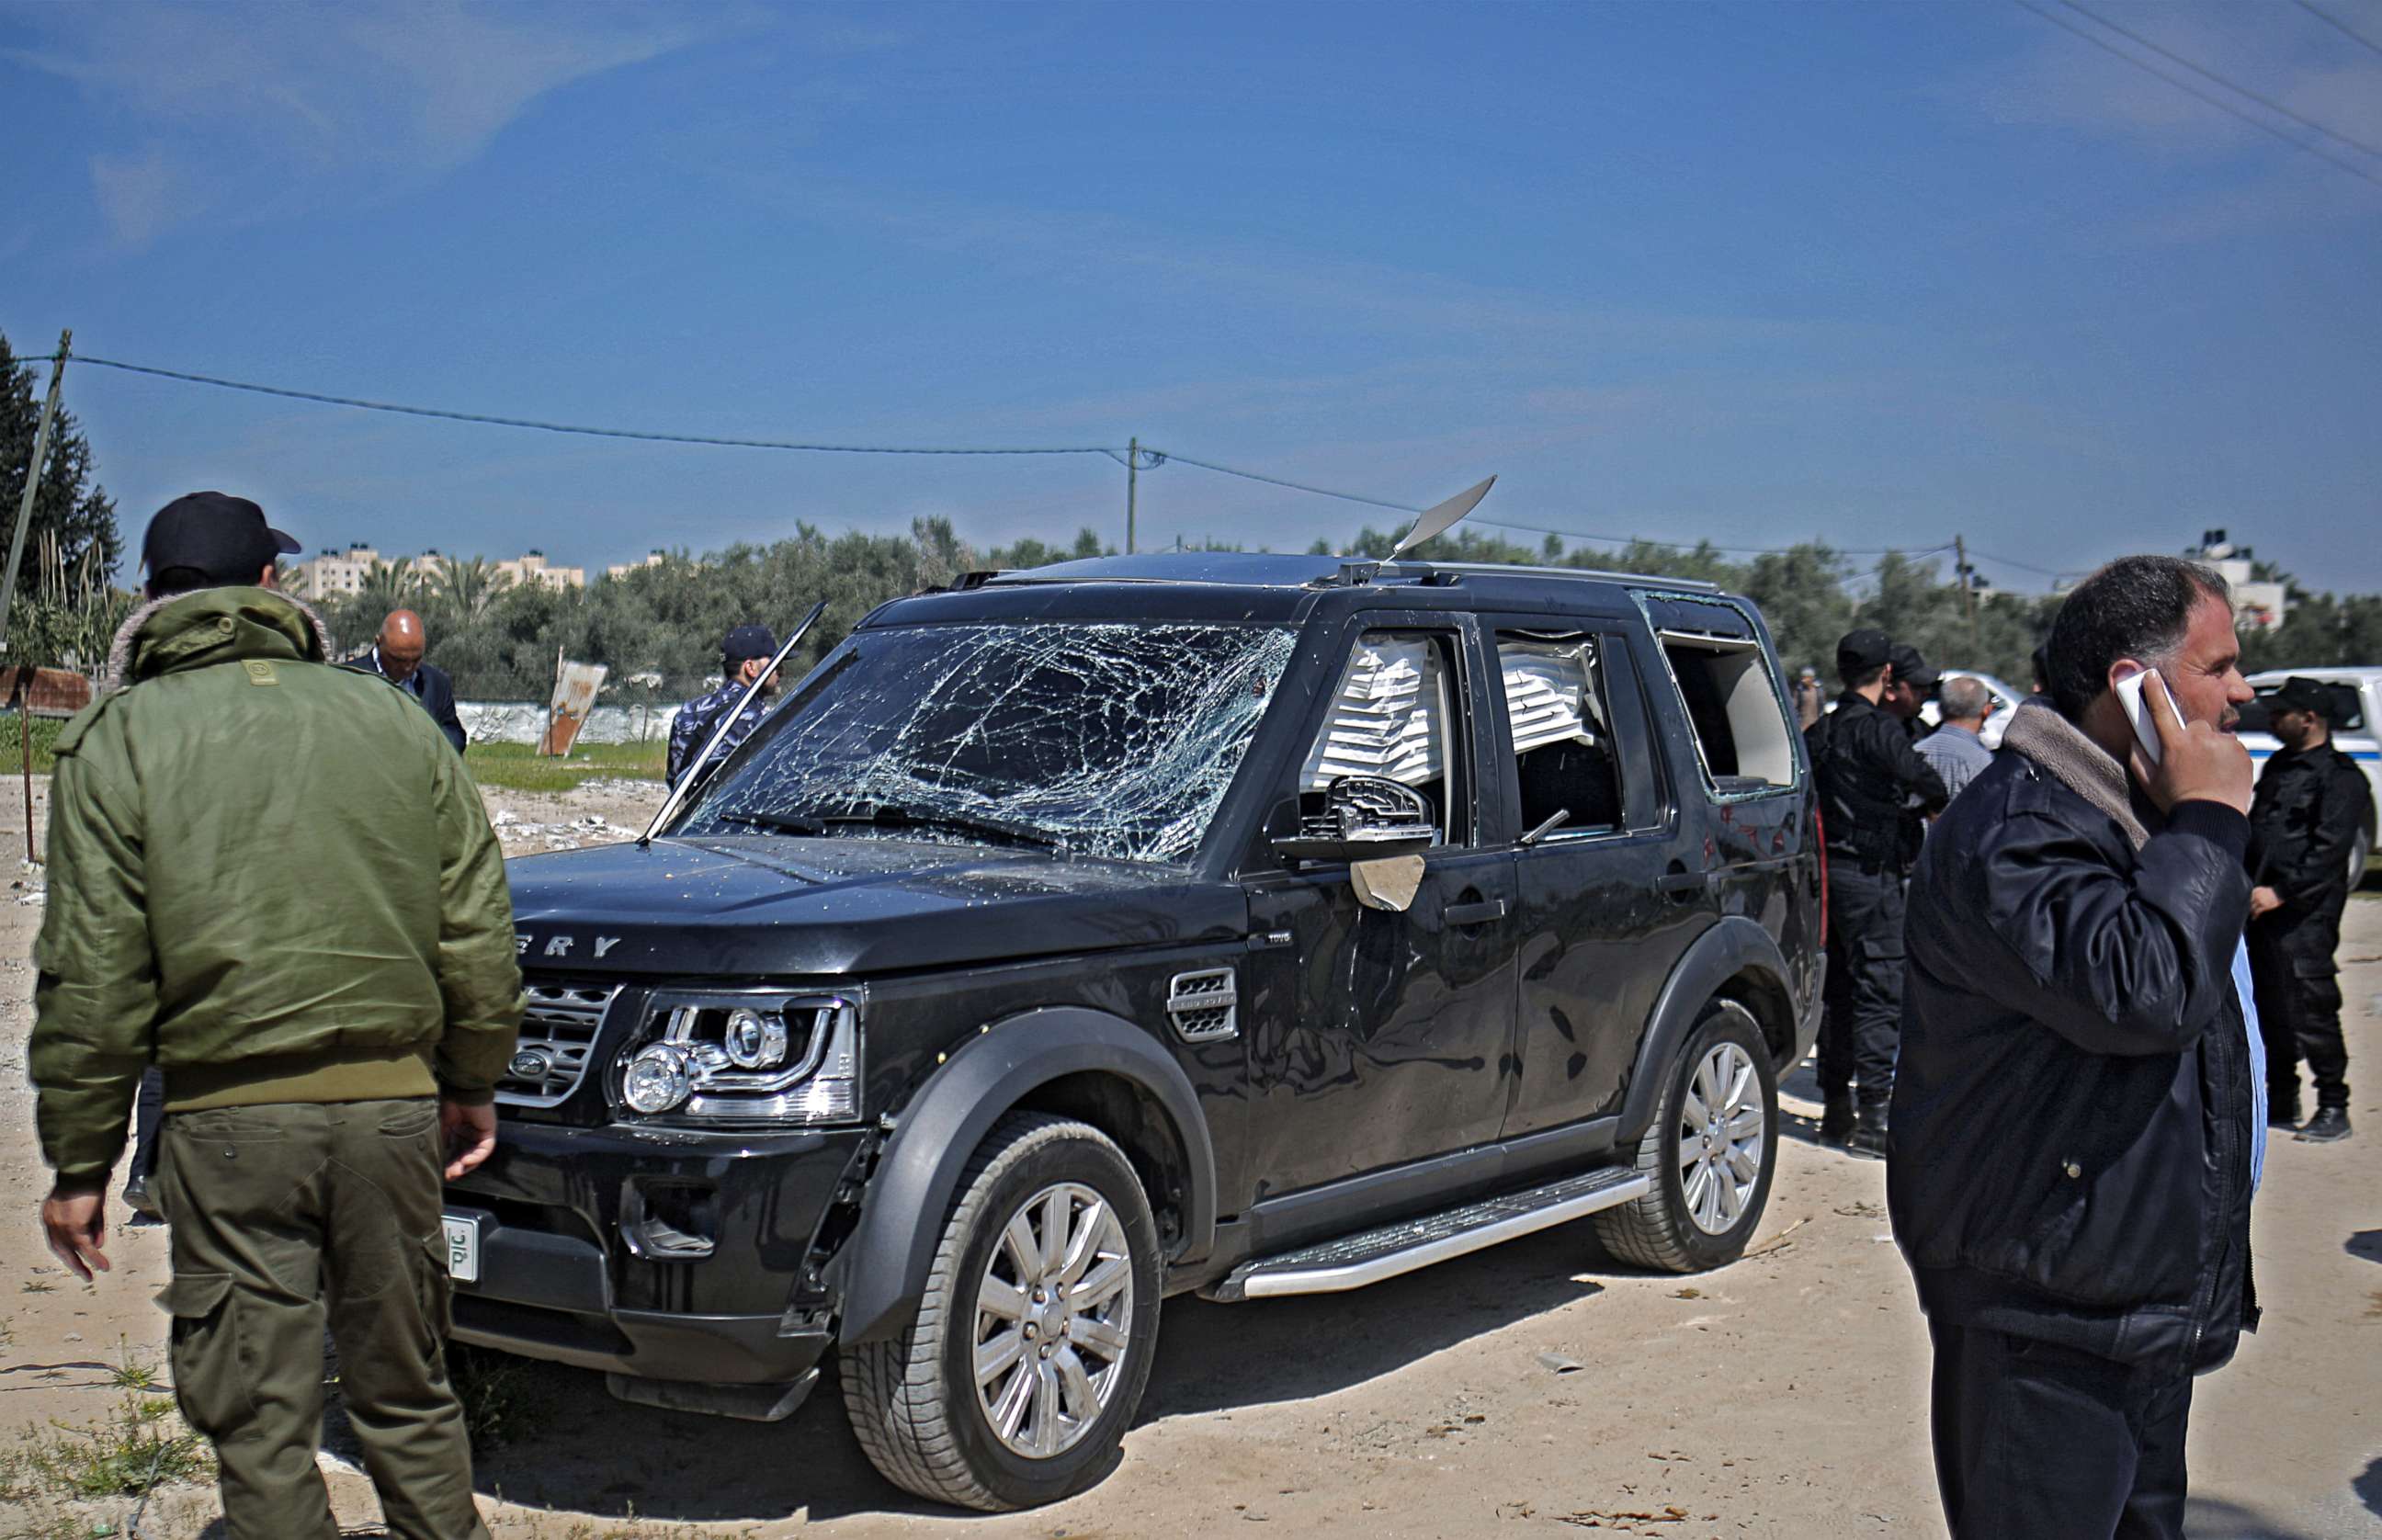 PHOTO: Hamas security officials inspect one of the cars of Palestinian Prime Minister Ramil Hamdallah's convoy that was targeted in an attack after his arrival in Beit Hanun town, the northern Gaza Strip, March 13, 2018.